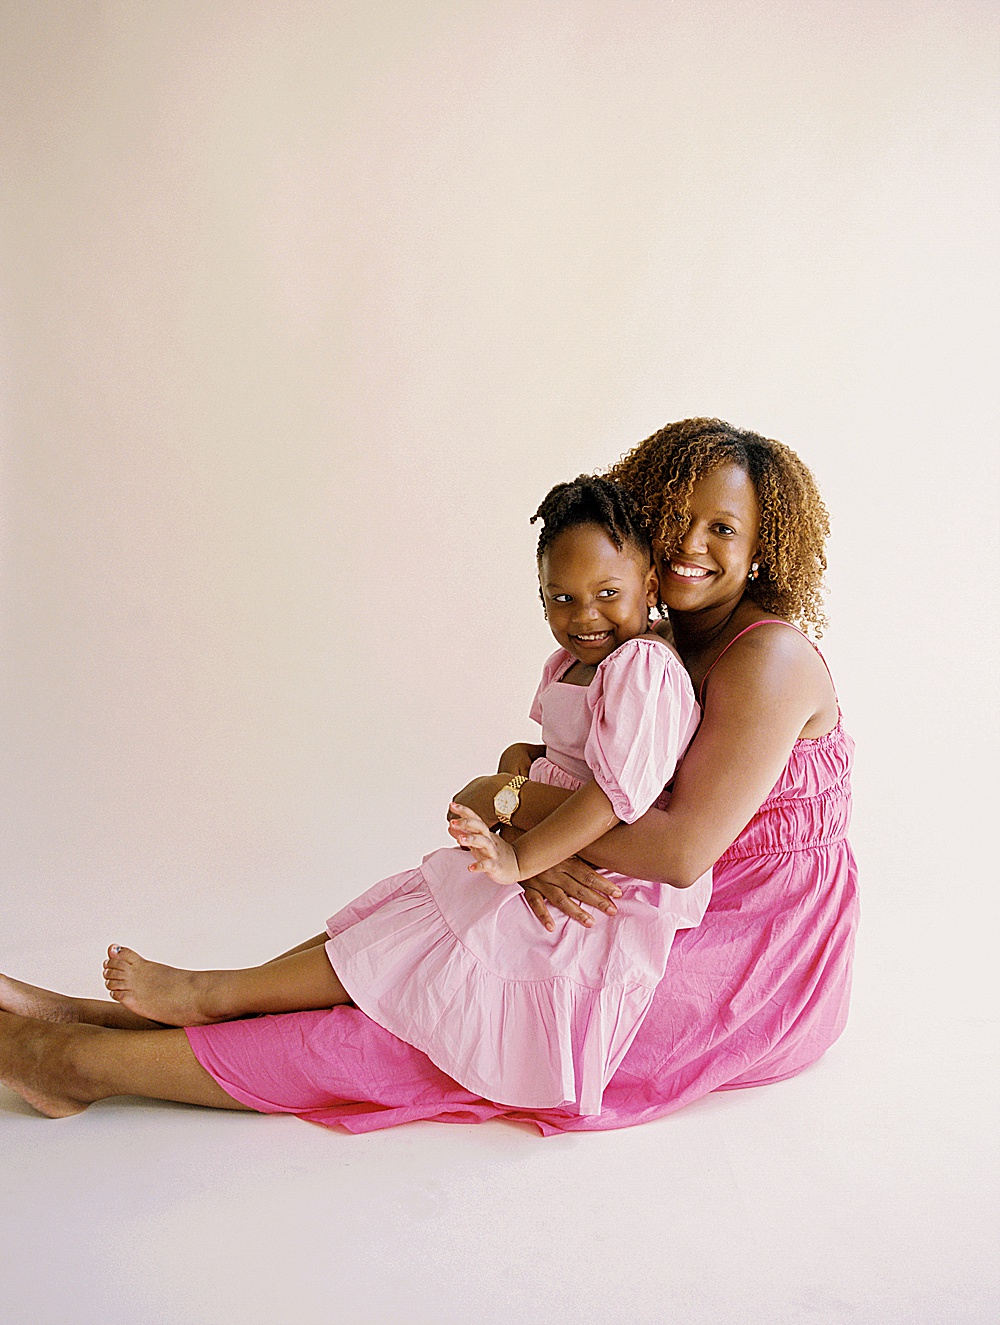 Palm Beach Mommy & Me Session with Film Portrait Photographer Renee Hollingshead